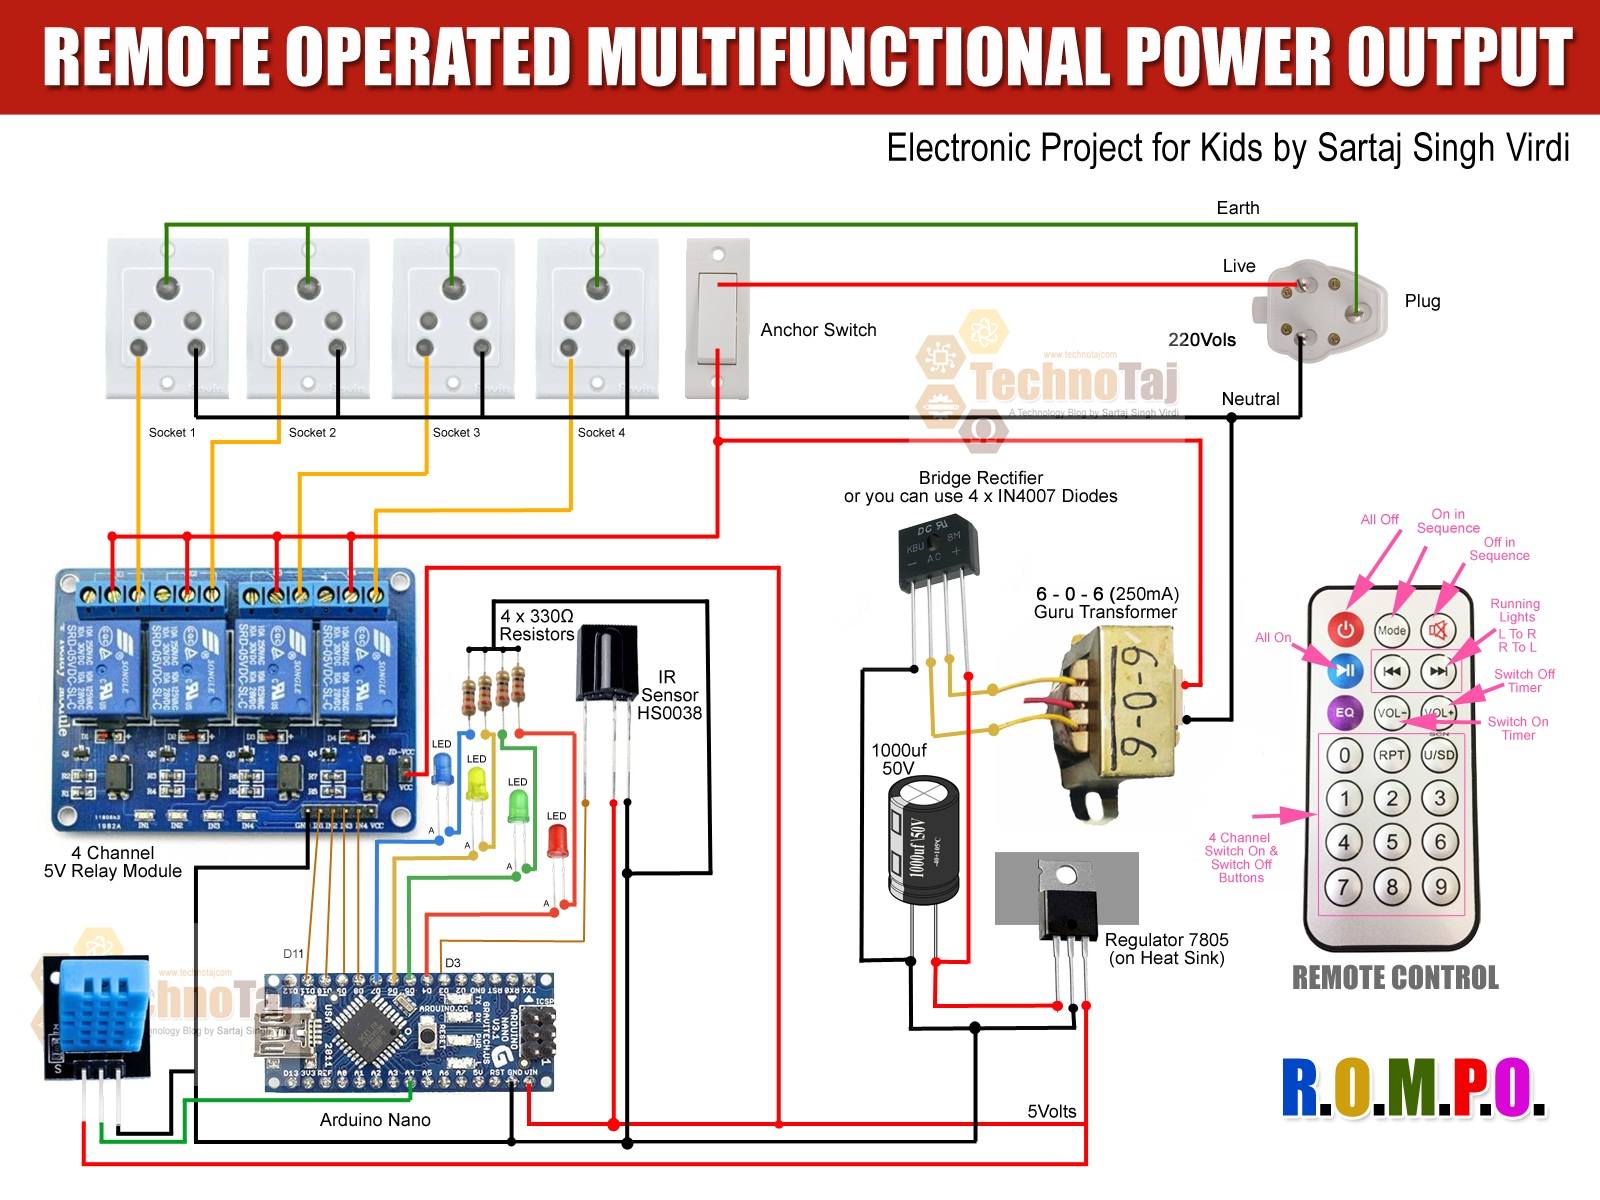 Circuit of Remote Operated Extension Lead